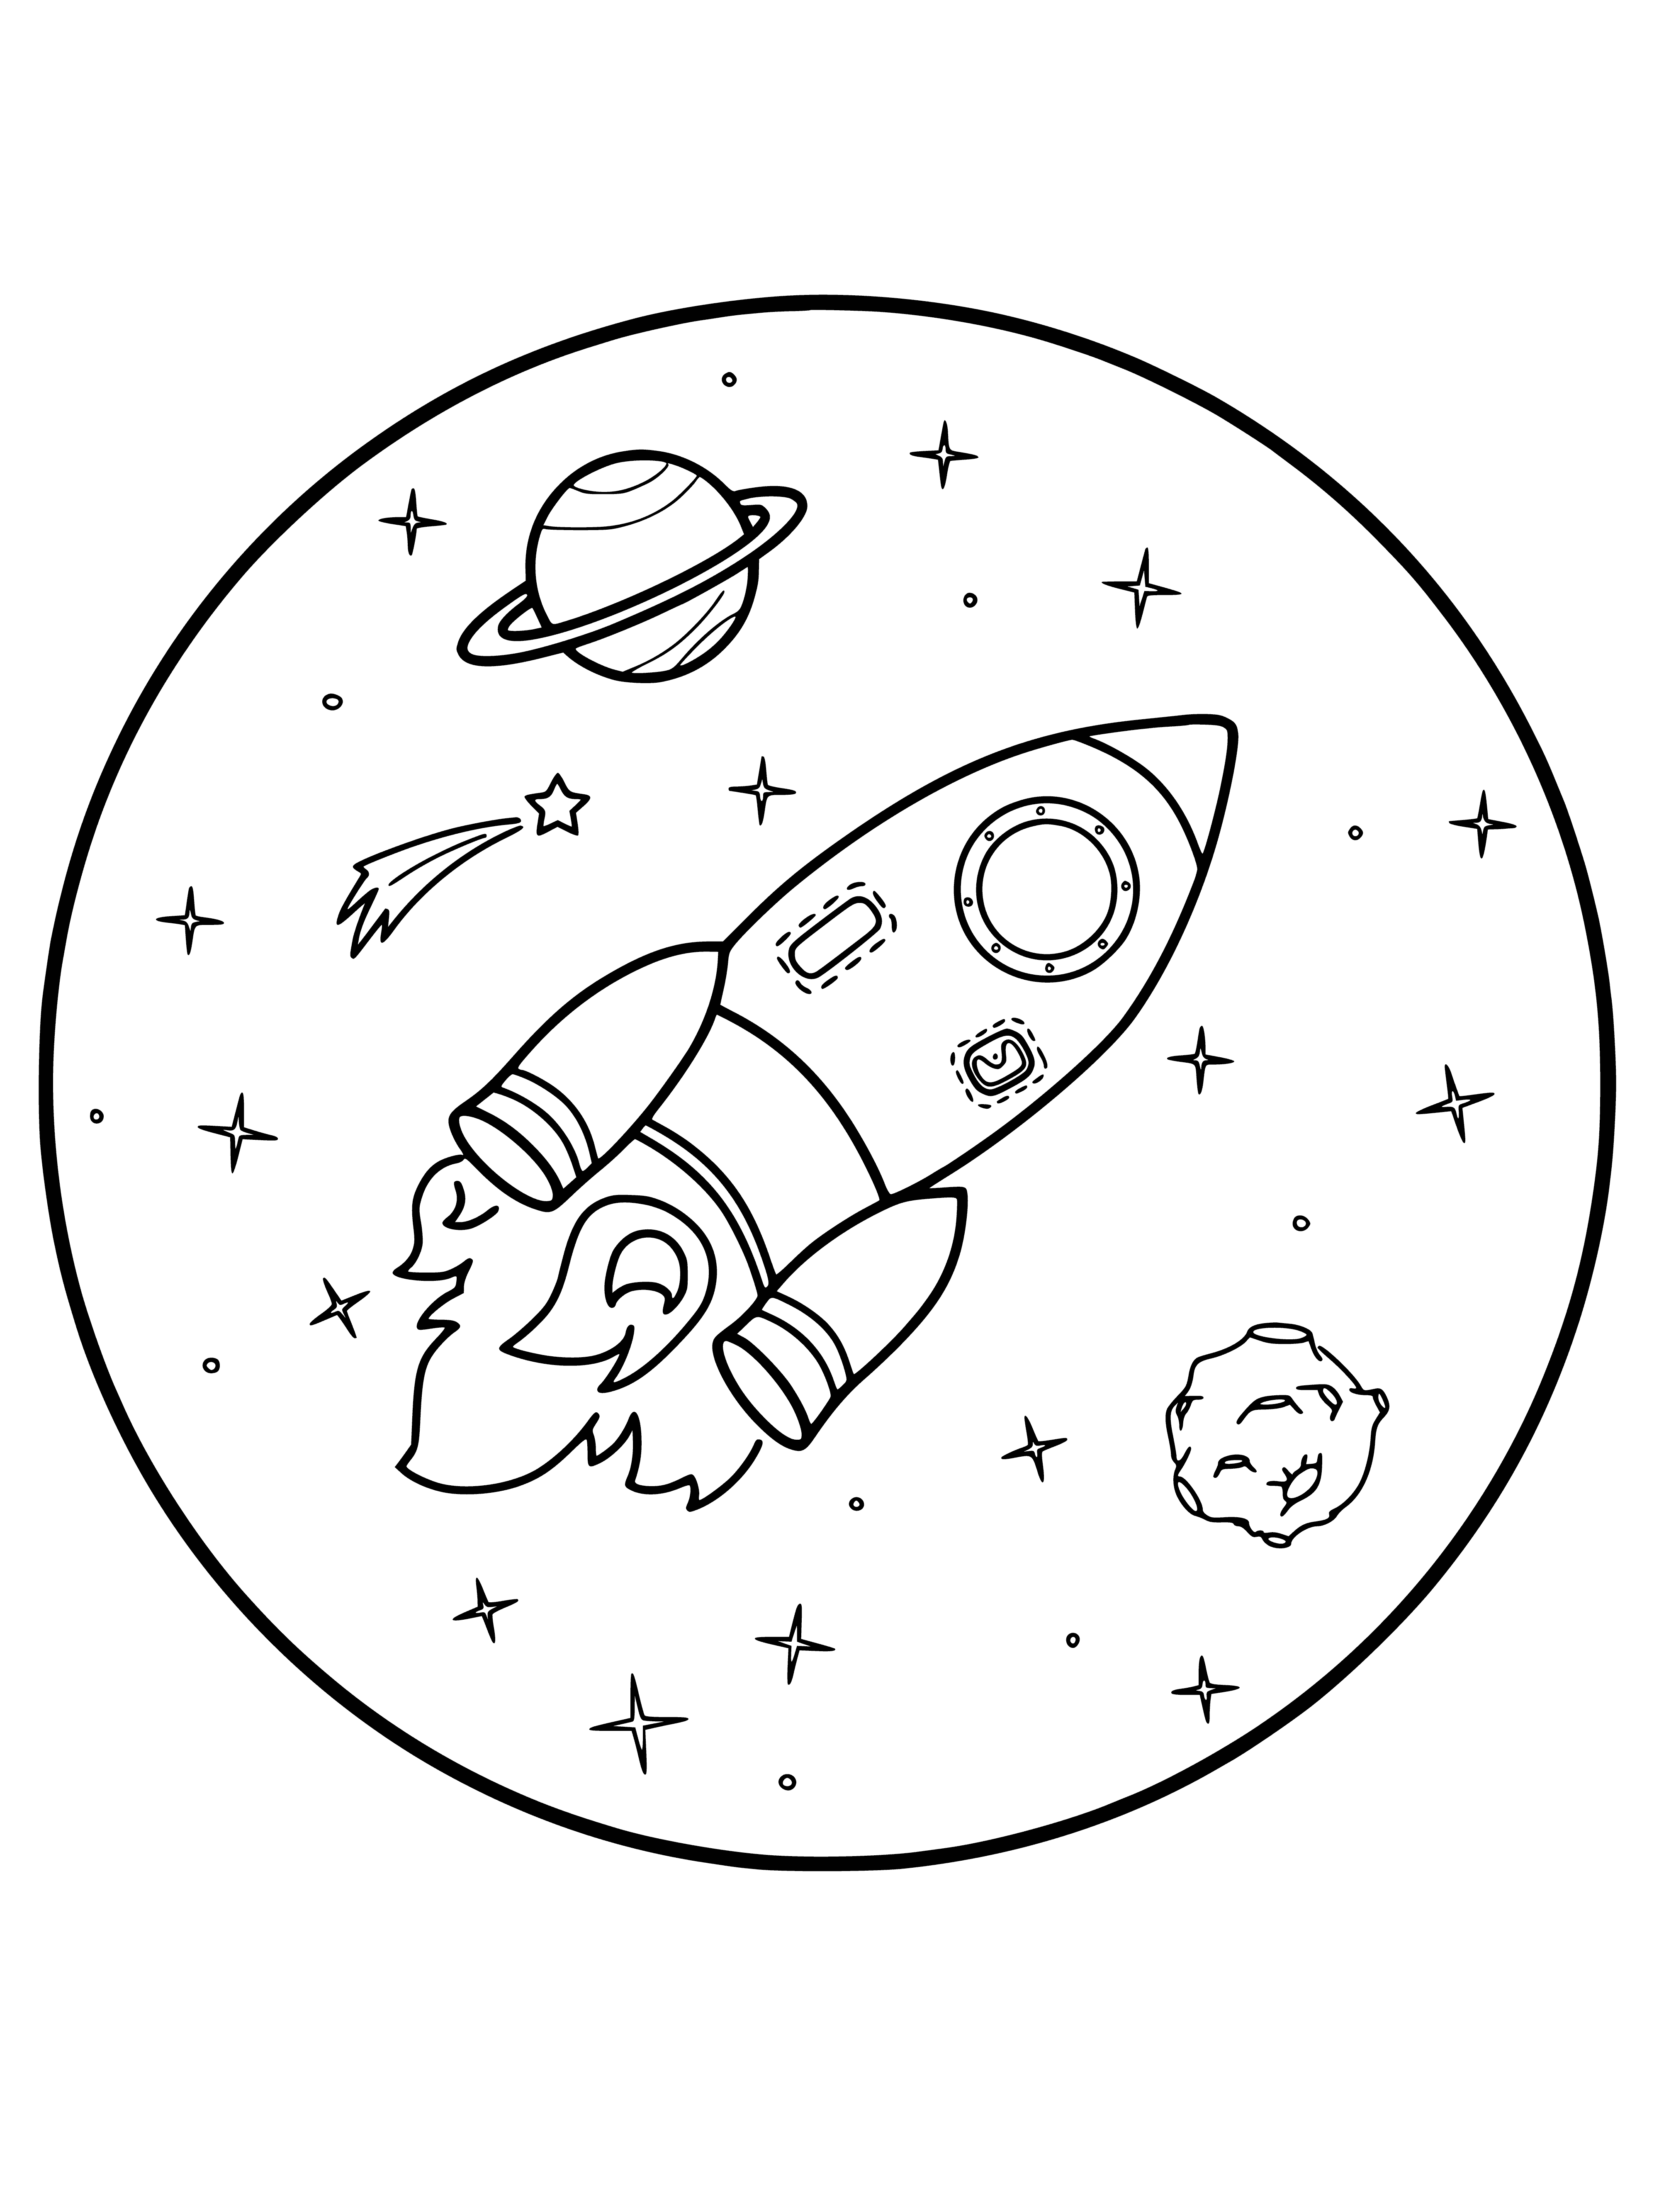 coloring page: Objects of different colors in open area with light shining on one, markings on its smooth surface.